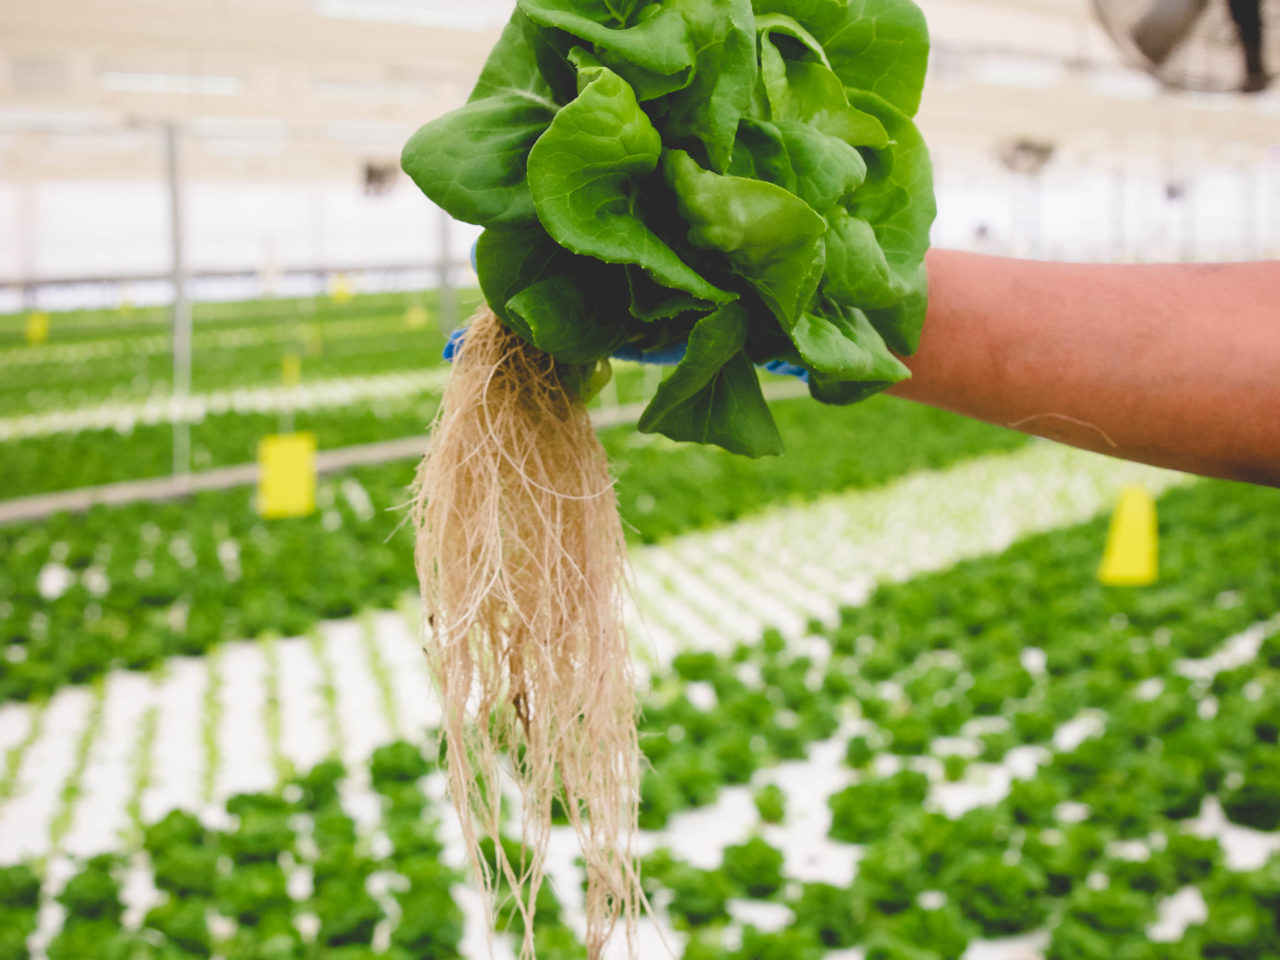 butter lettuce being held in greenhouse